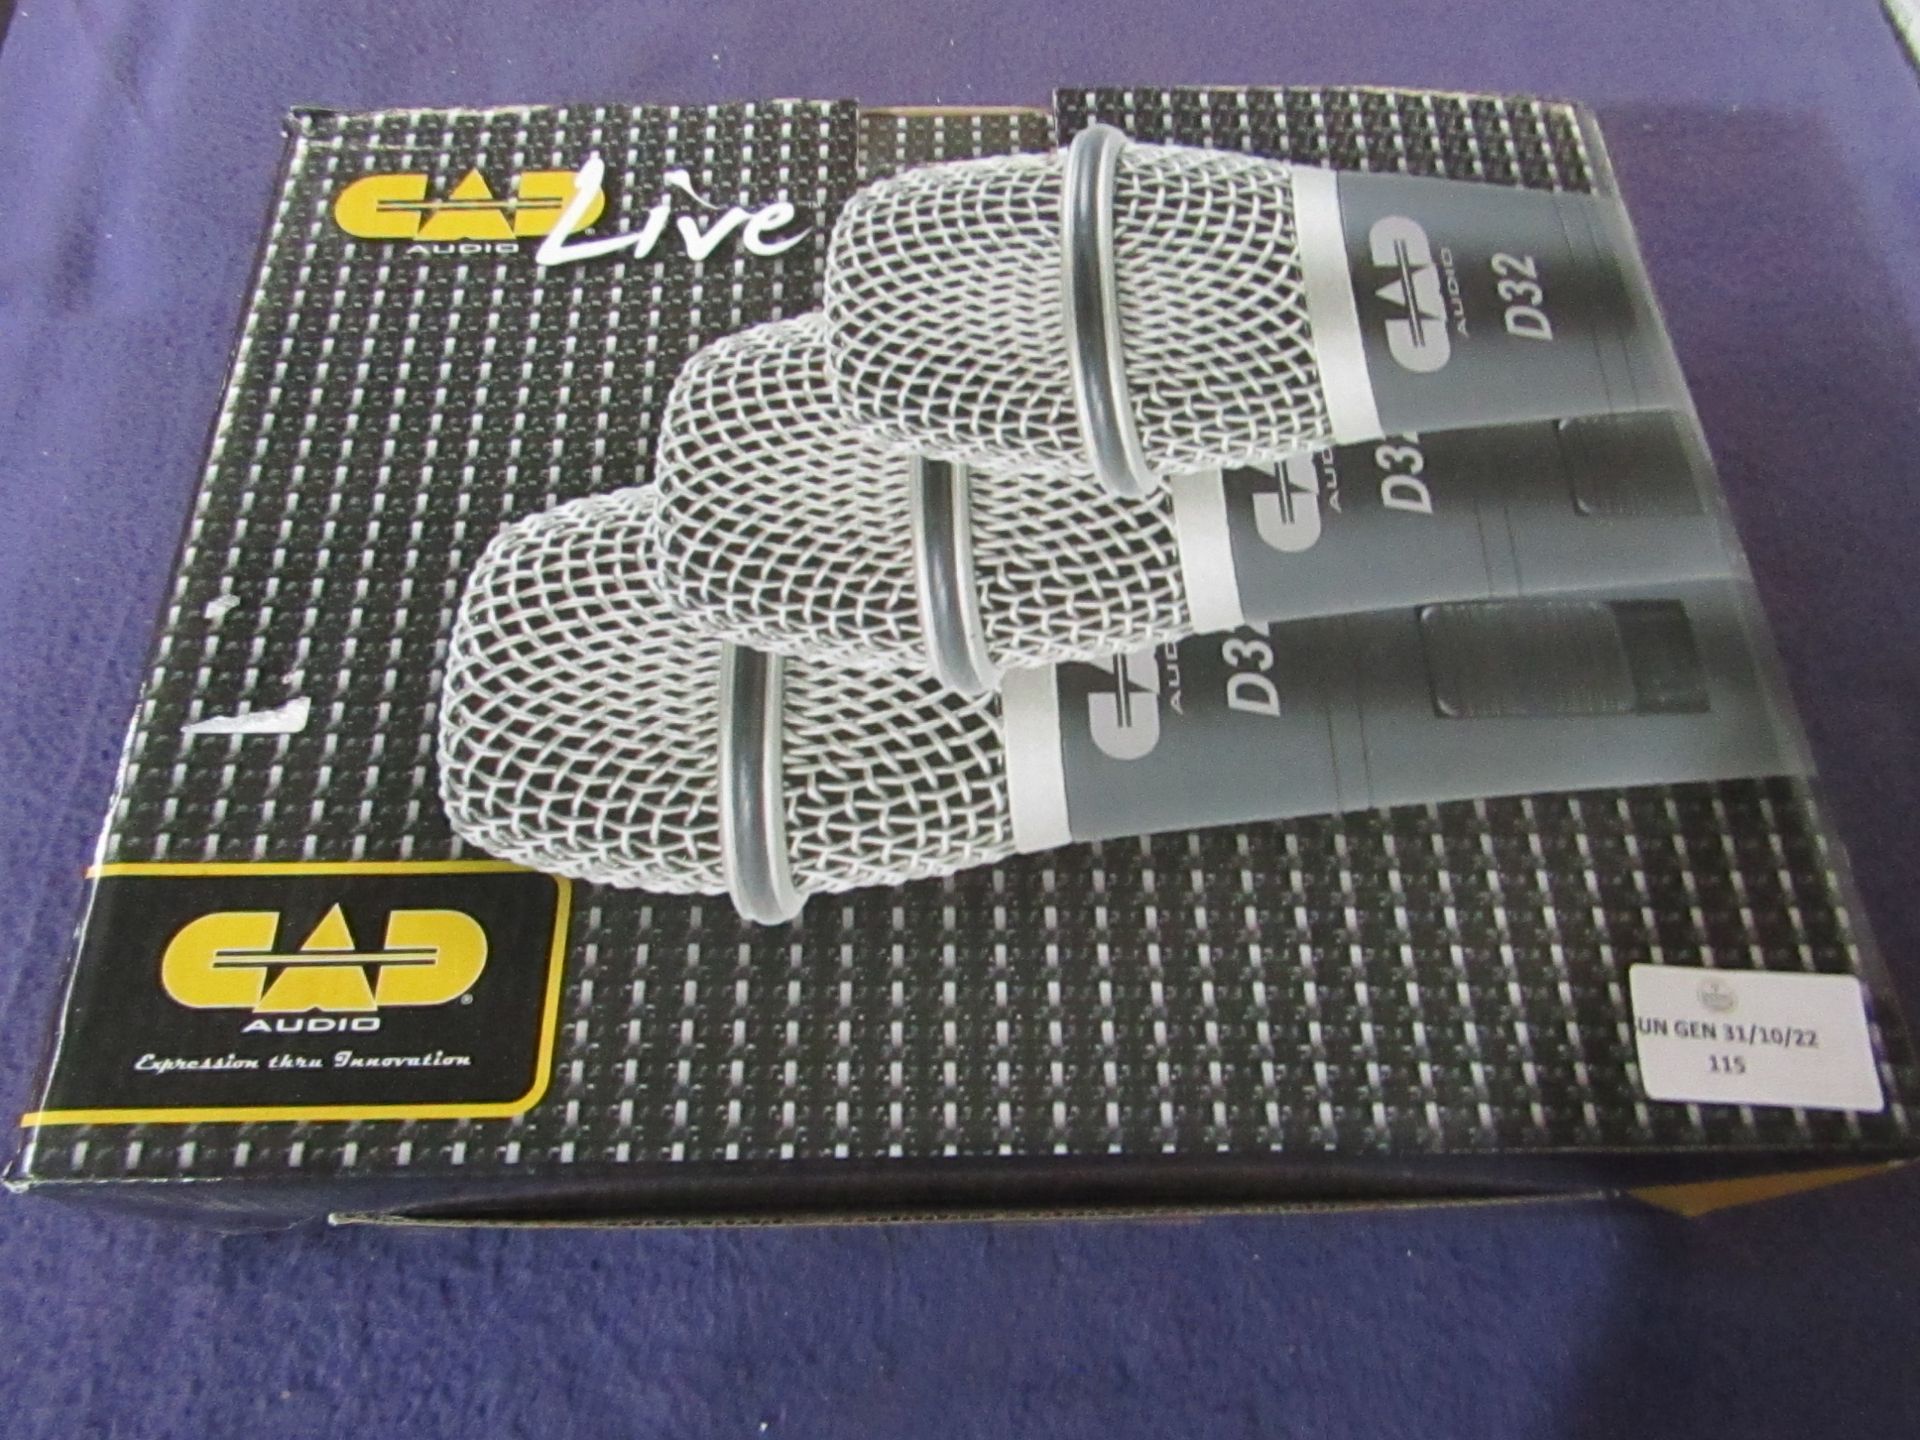 CAD - Set of 3 Microphones ( D32 ) - New & Boxed.